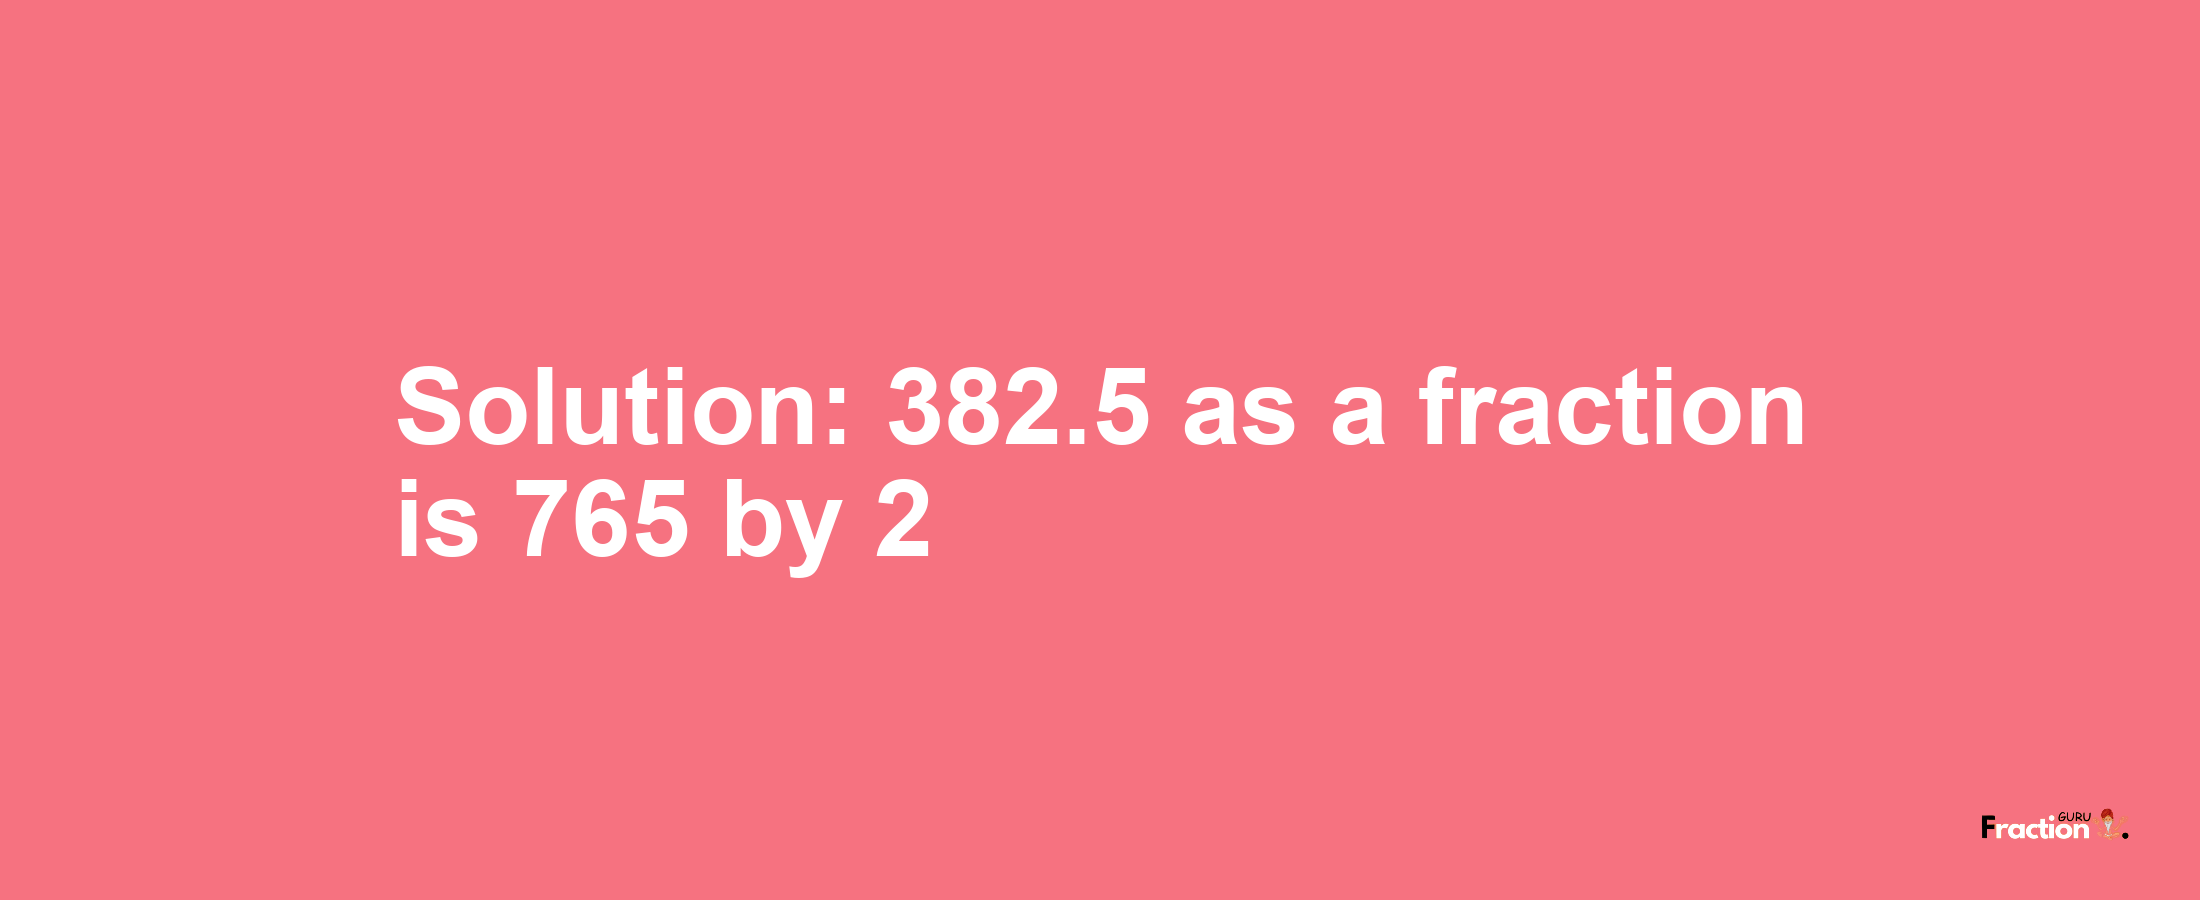 Solution:382.5 as a fraction is 765/2